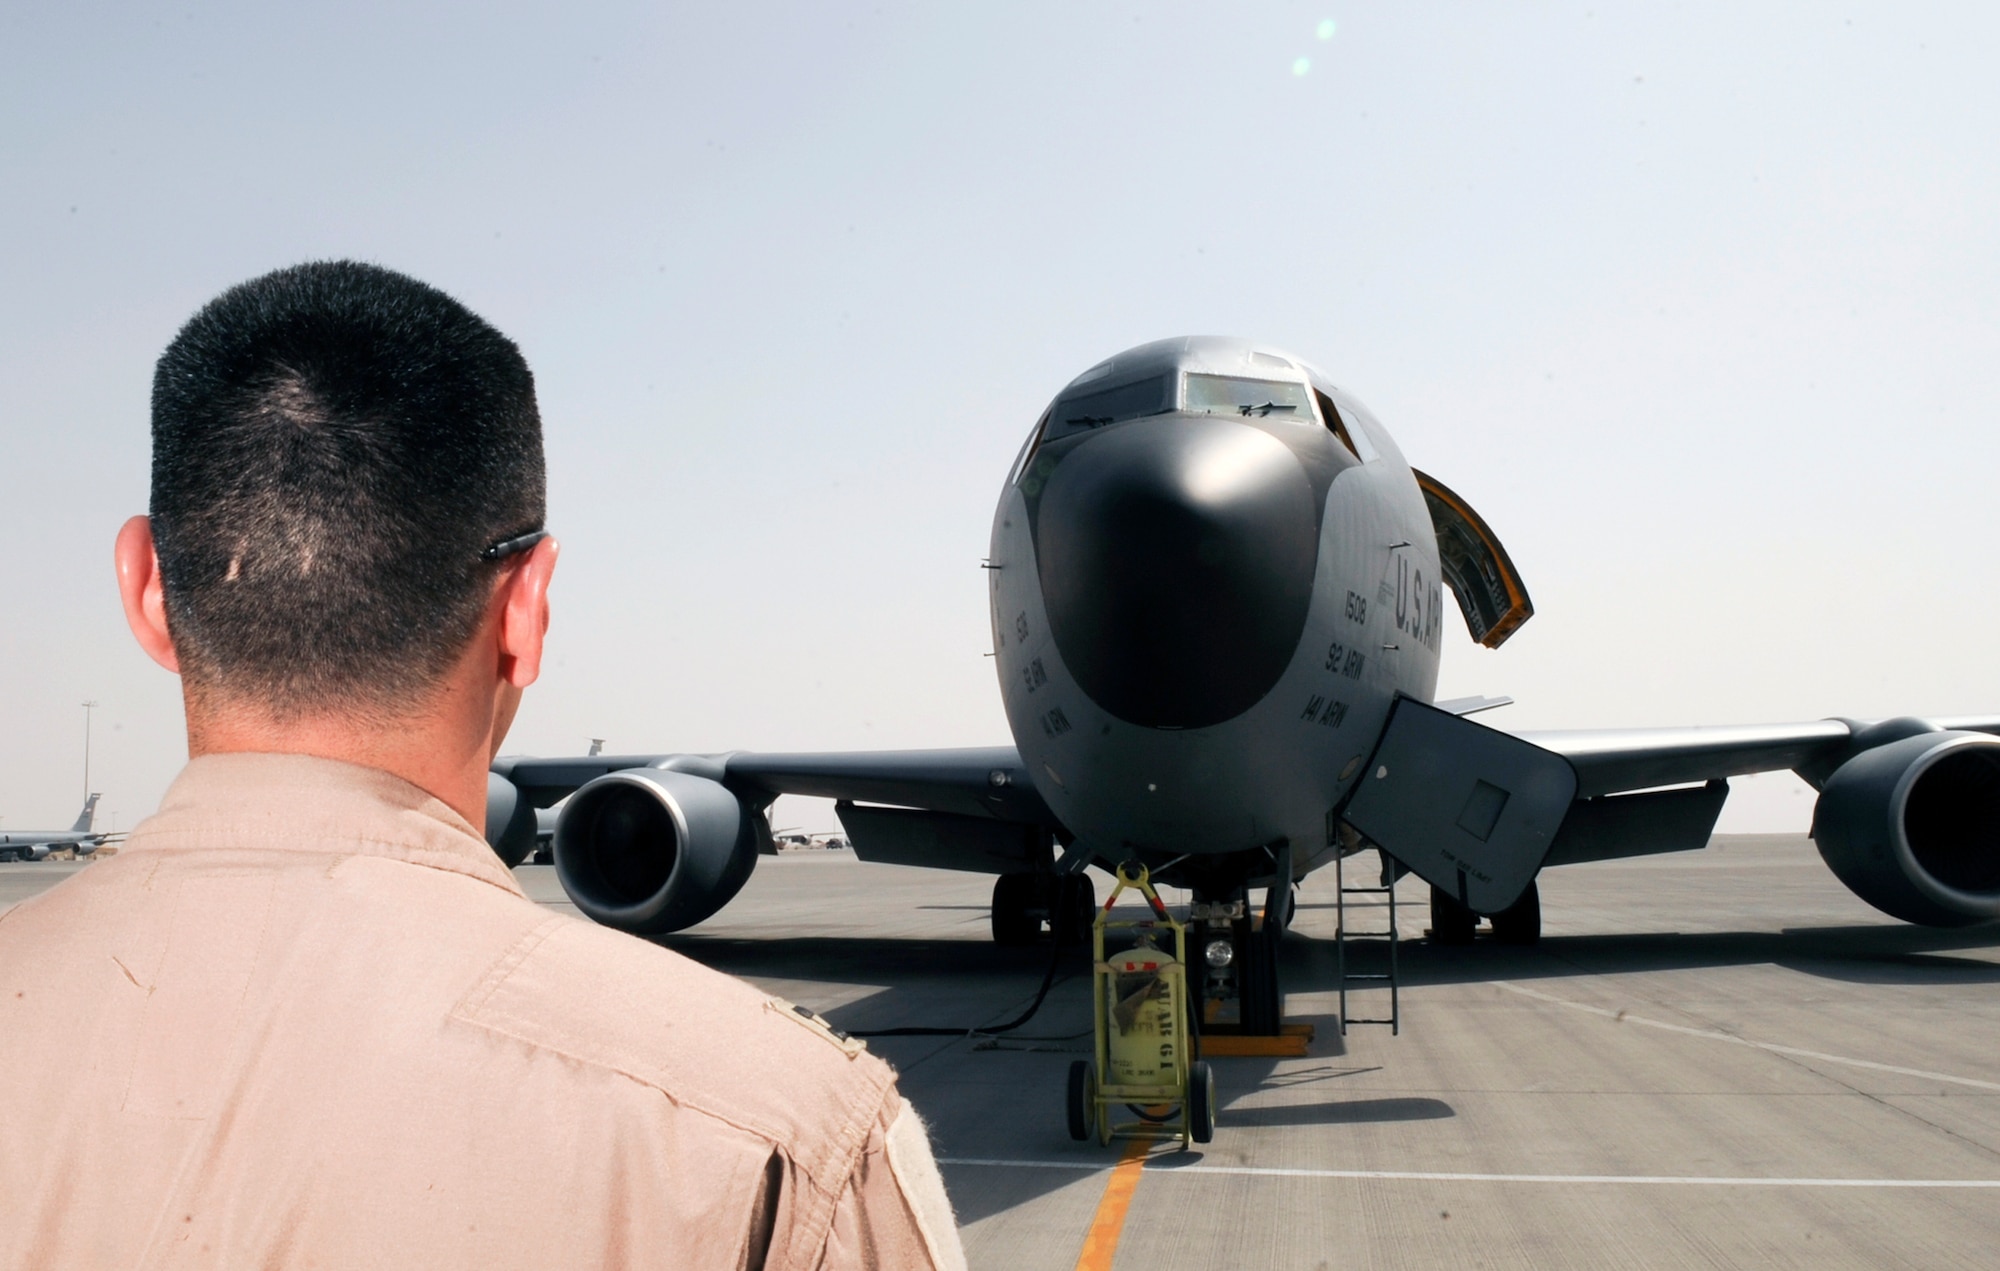 Capt. Andrew McLay, a pilot with the 340th Expeditionary Air Refueling Squadron at an air base in Southwest Asia, does a walk-around to check out the overall exterior of a KC-135 Stratotanker as part of his preflight check prior to refueling mission.  (U.S. Air Force Photo by Staff Sgt. Joshua Garcia/released) 